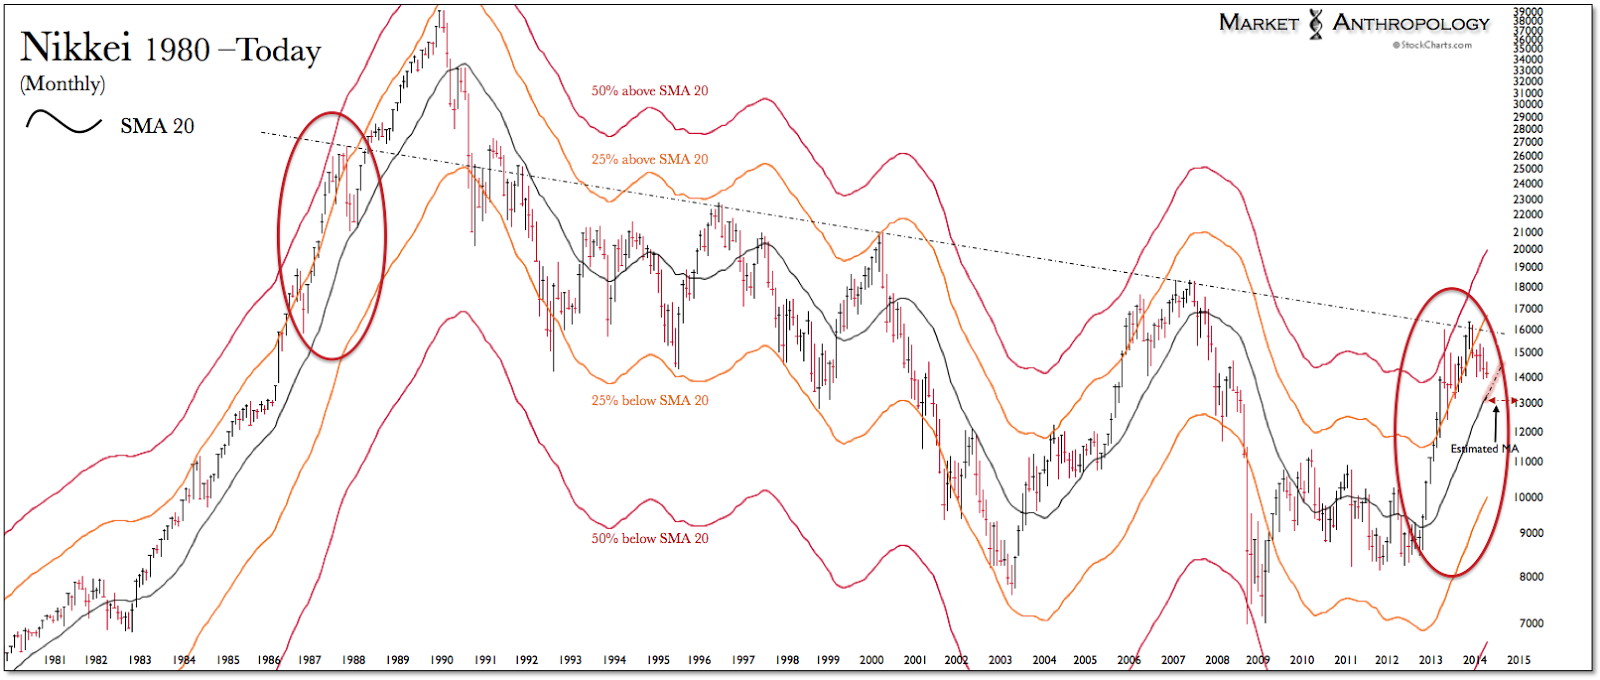 Nikkei 1980-Today Monthly